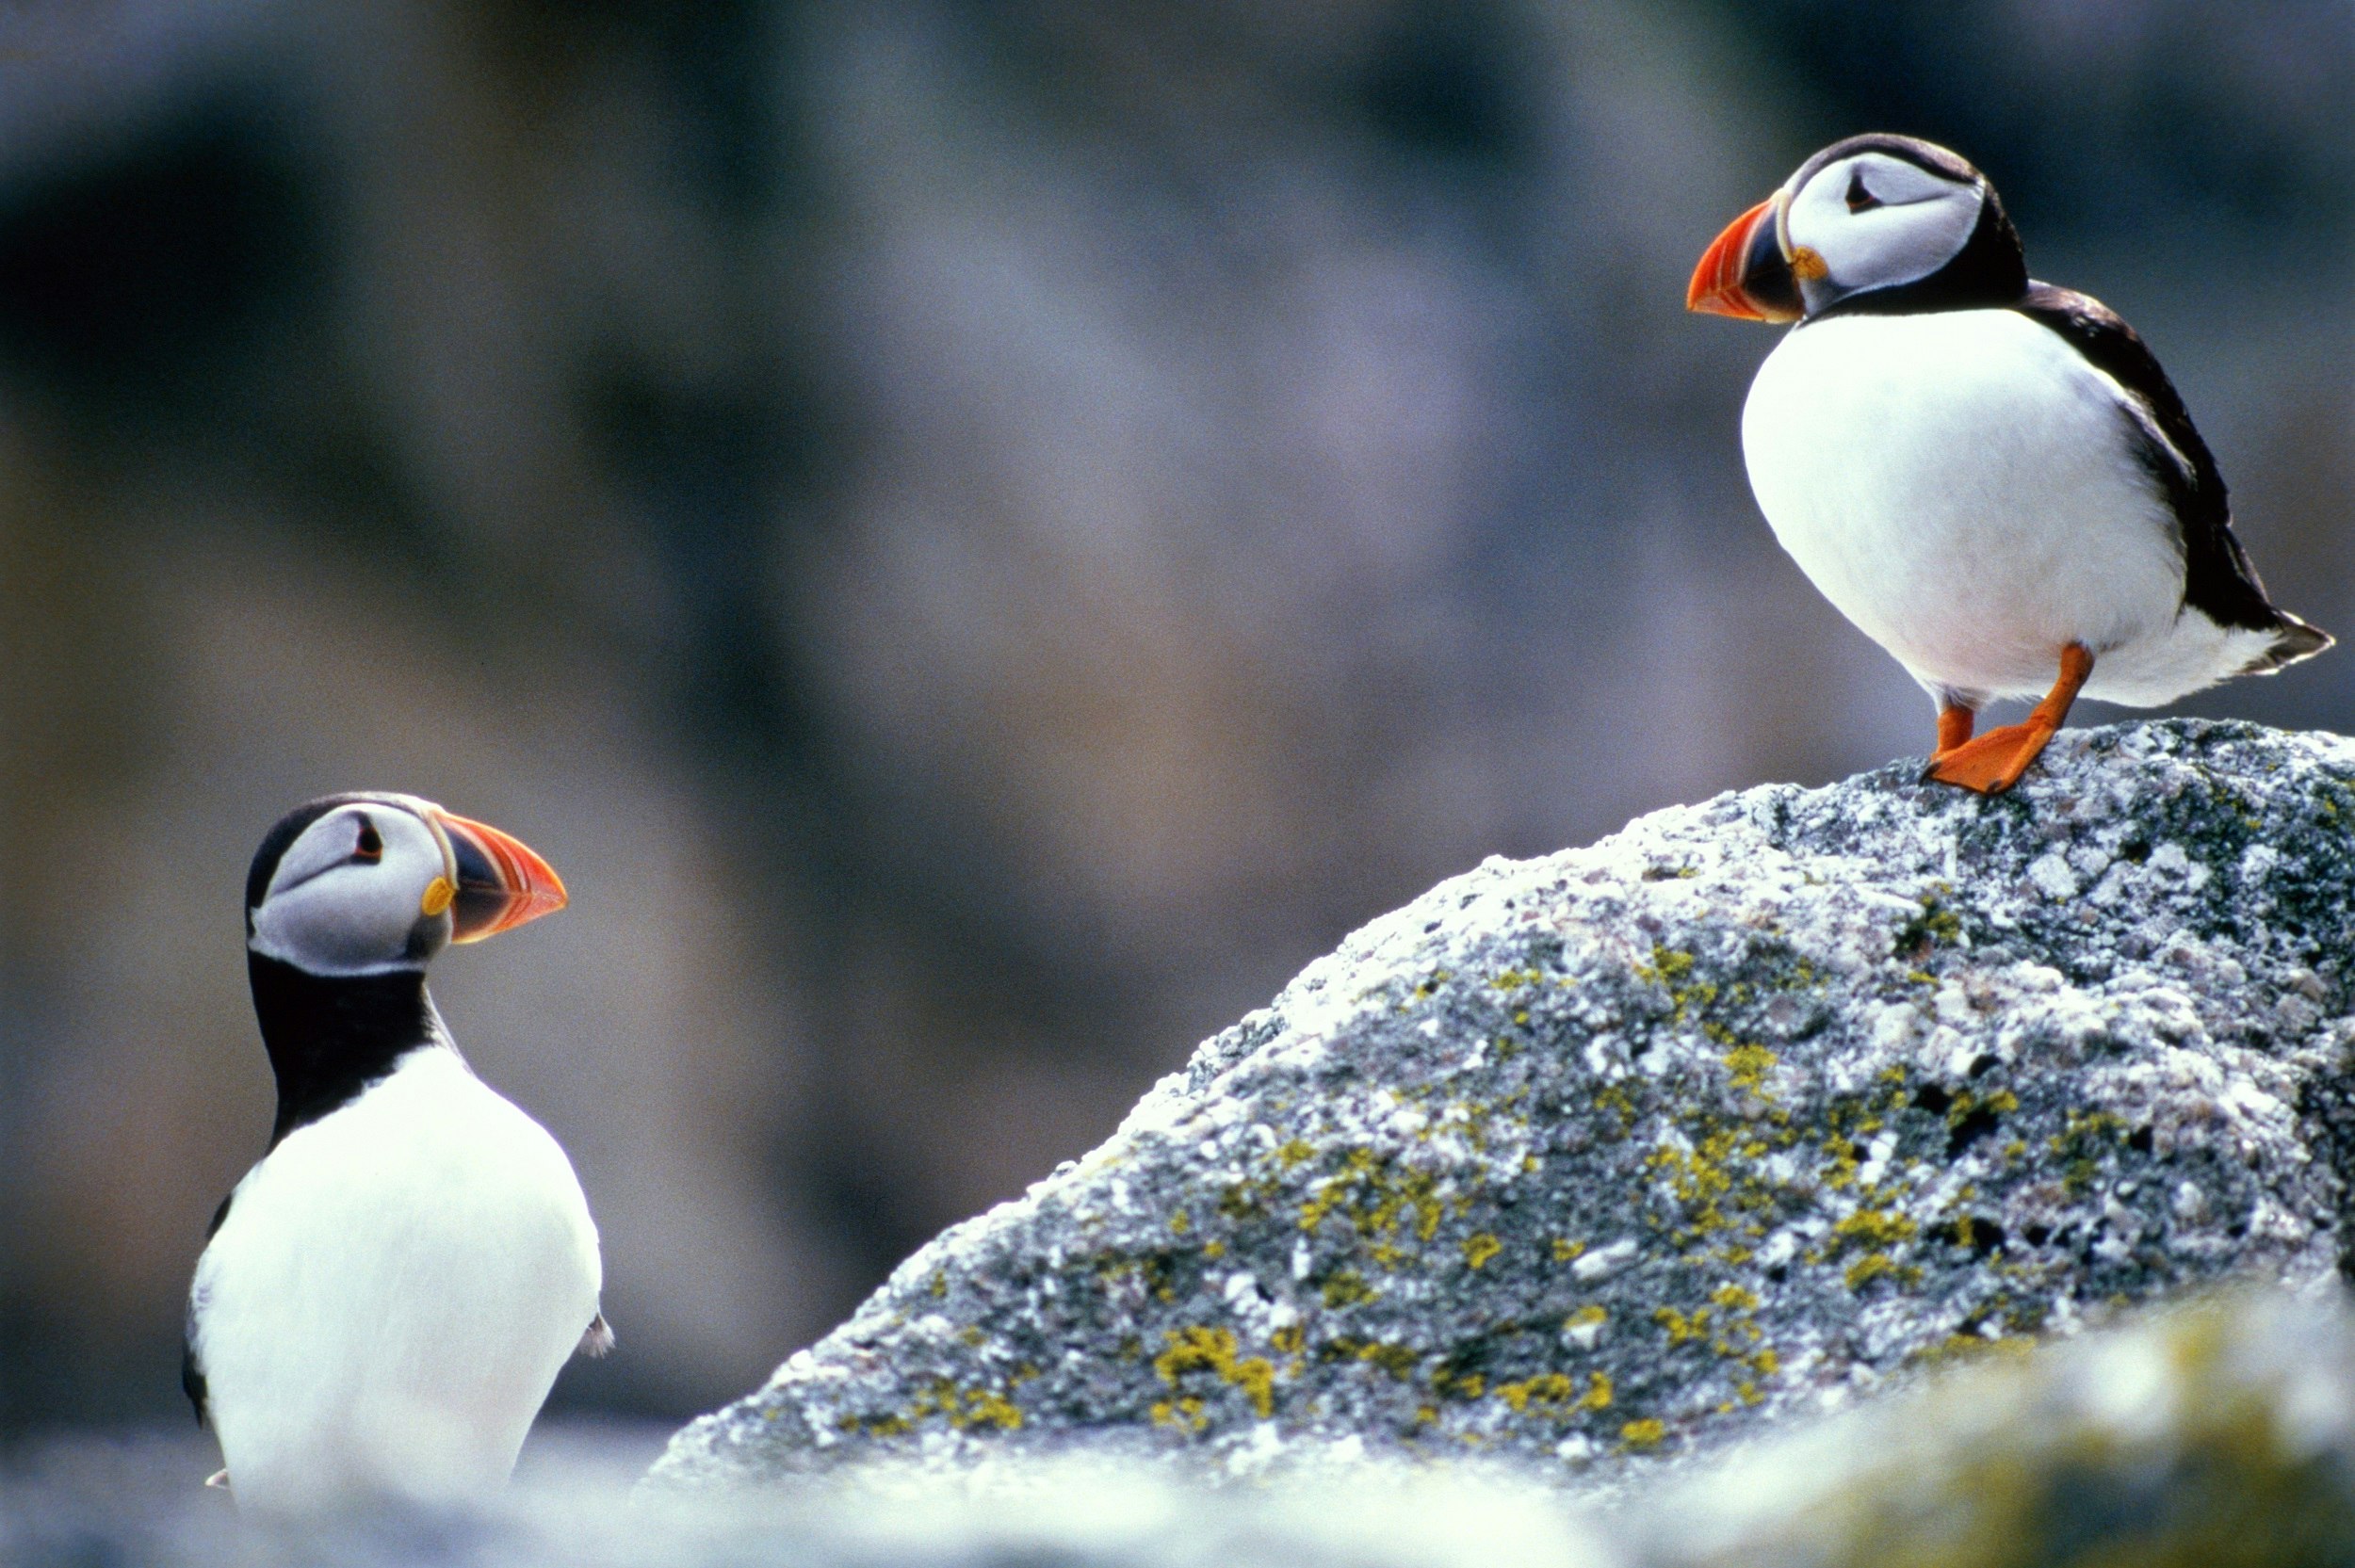 Two puffins, with black backs, white chests and orange-and-yellow beaks, face each other on a rock